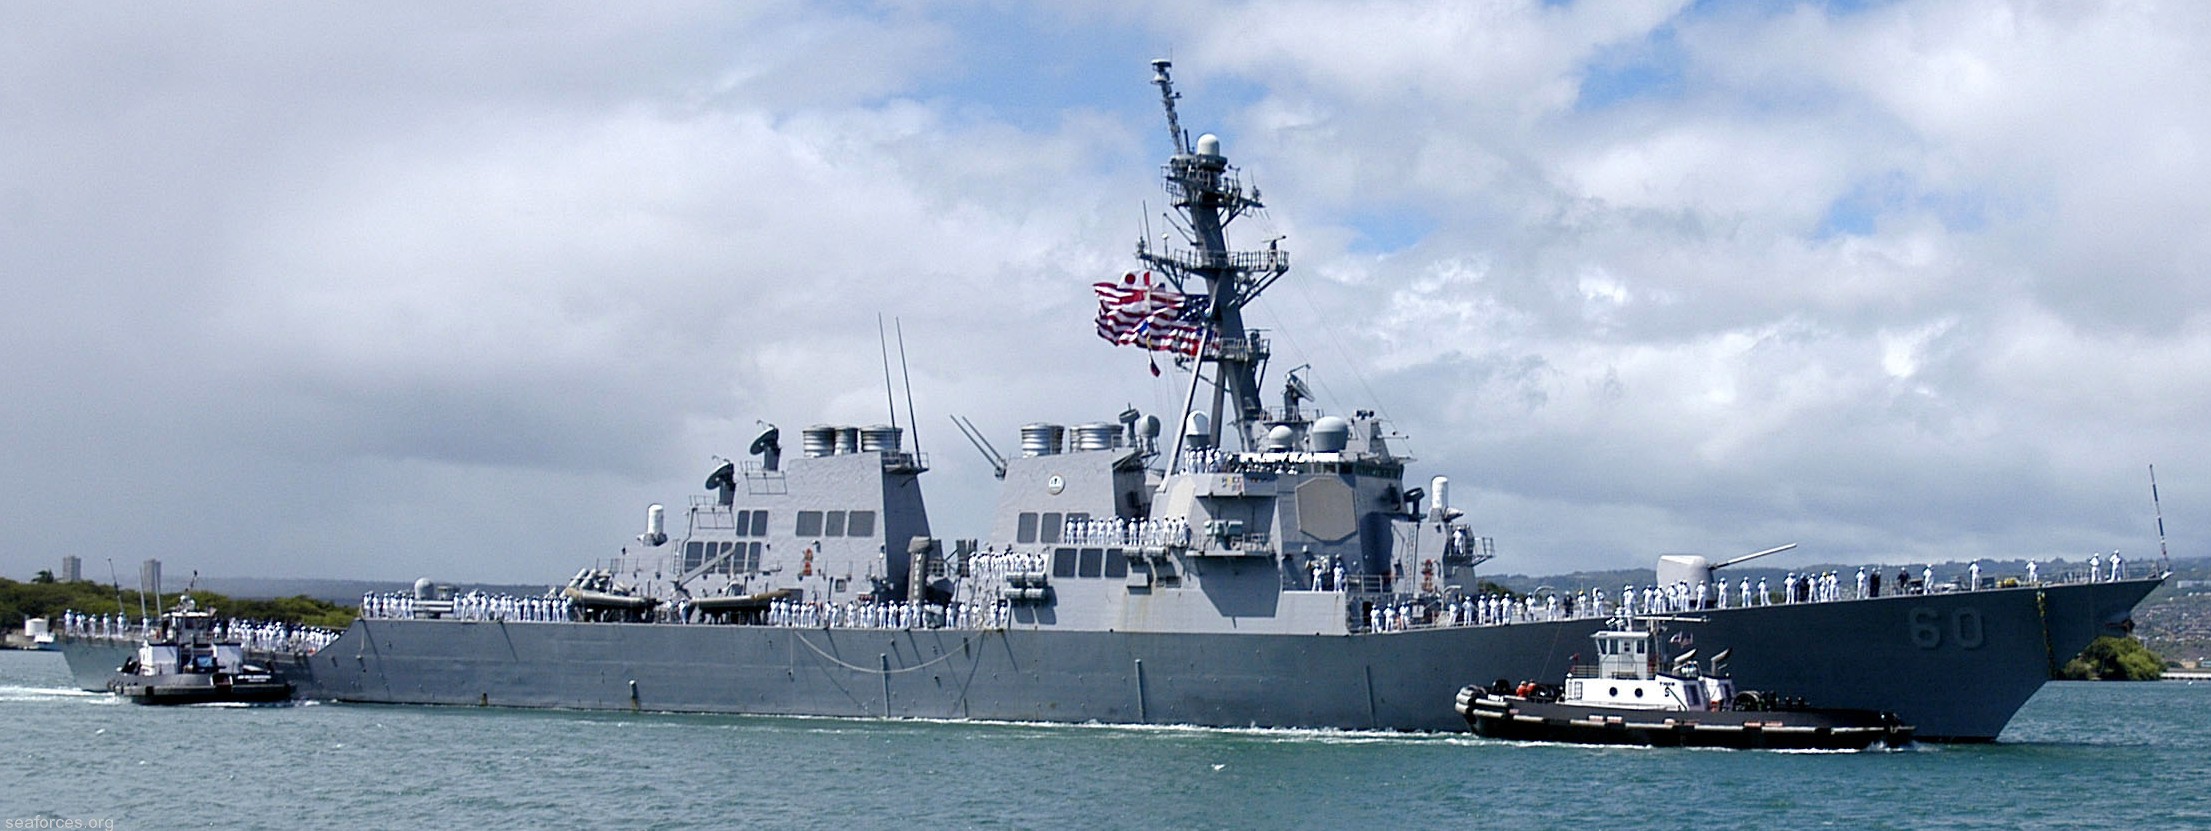 ddg-60 uss paul hamilton guided missile destroyer us navy 38